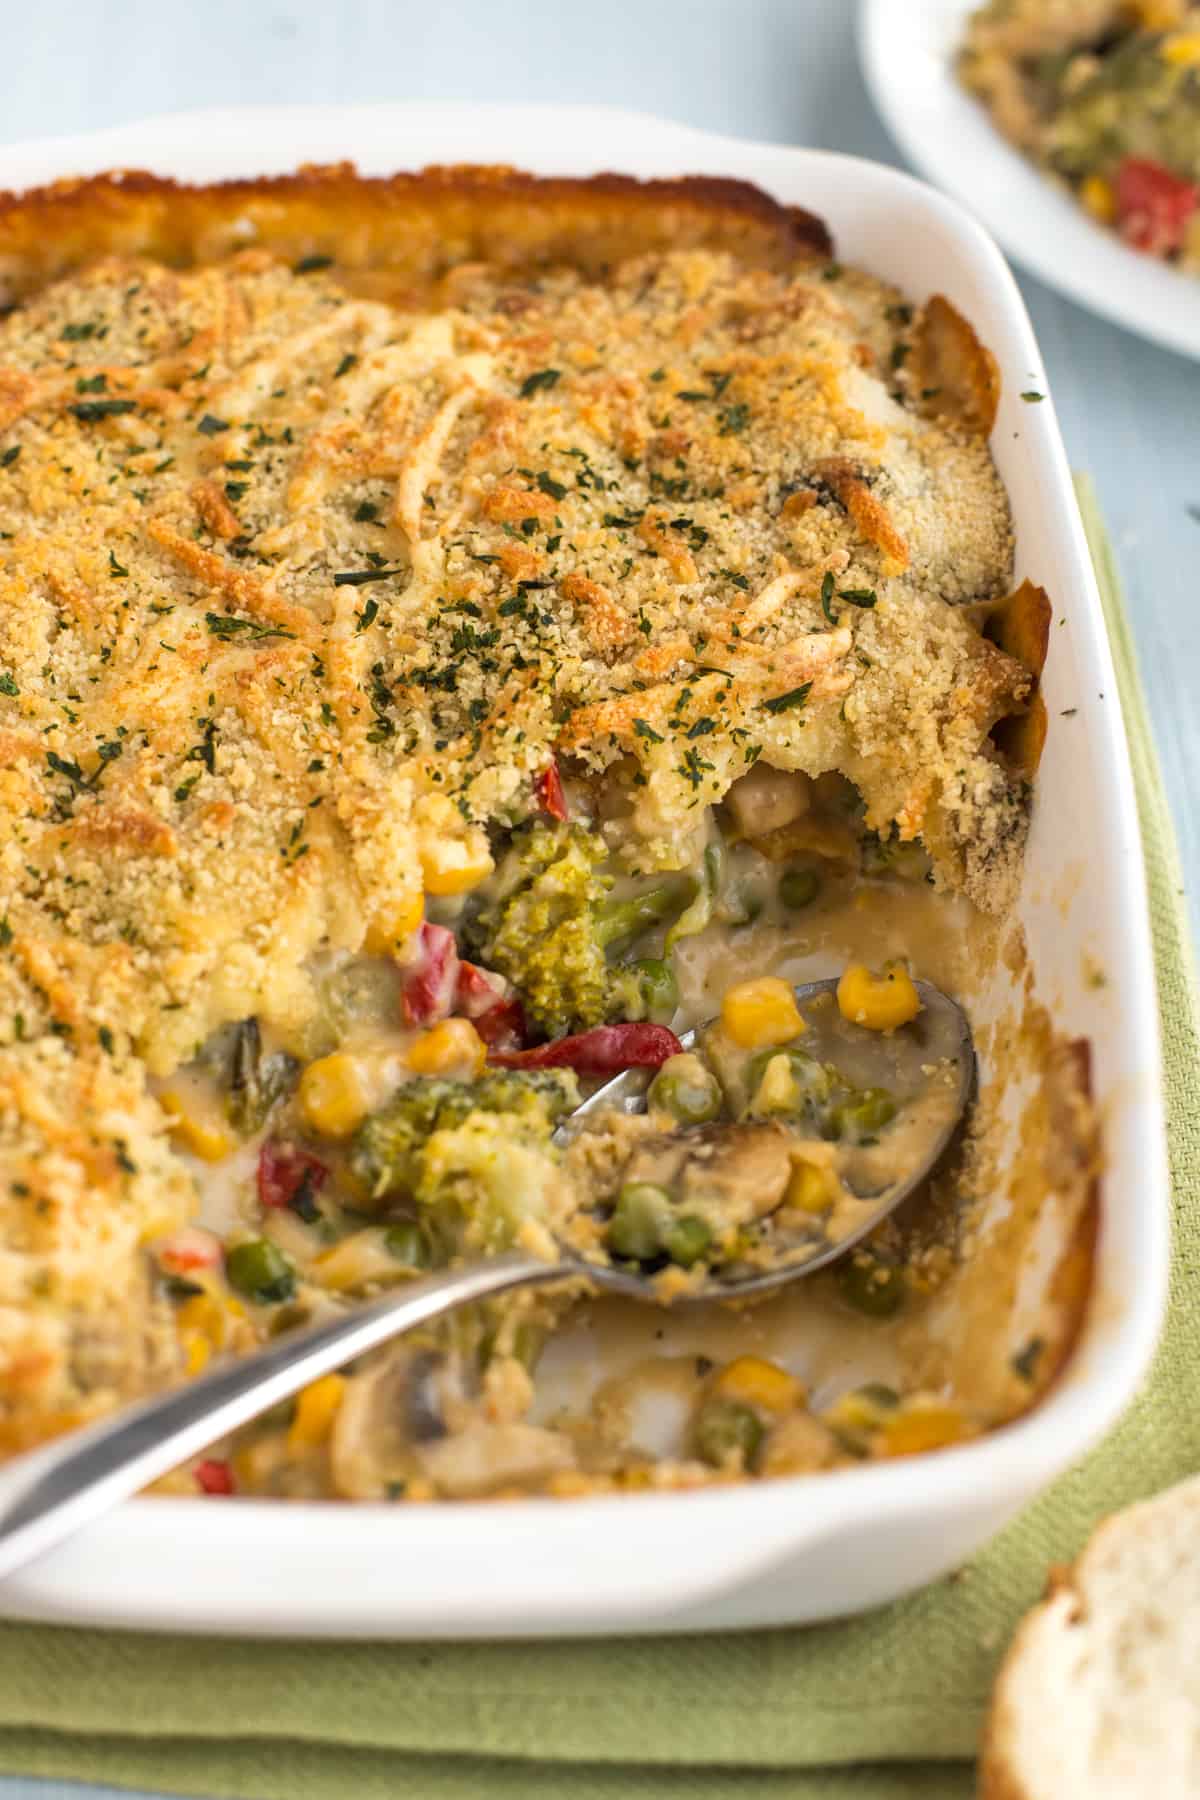 A creamy veggie bake with a large scoop removed, showing the creamy vegetables inside.